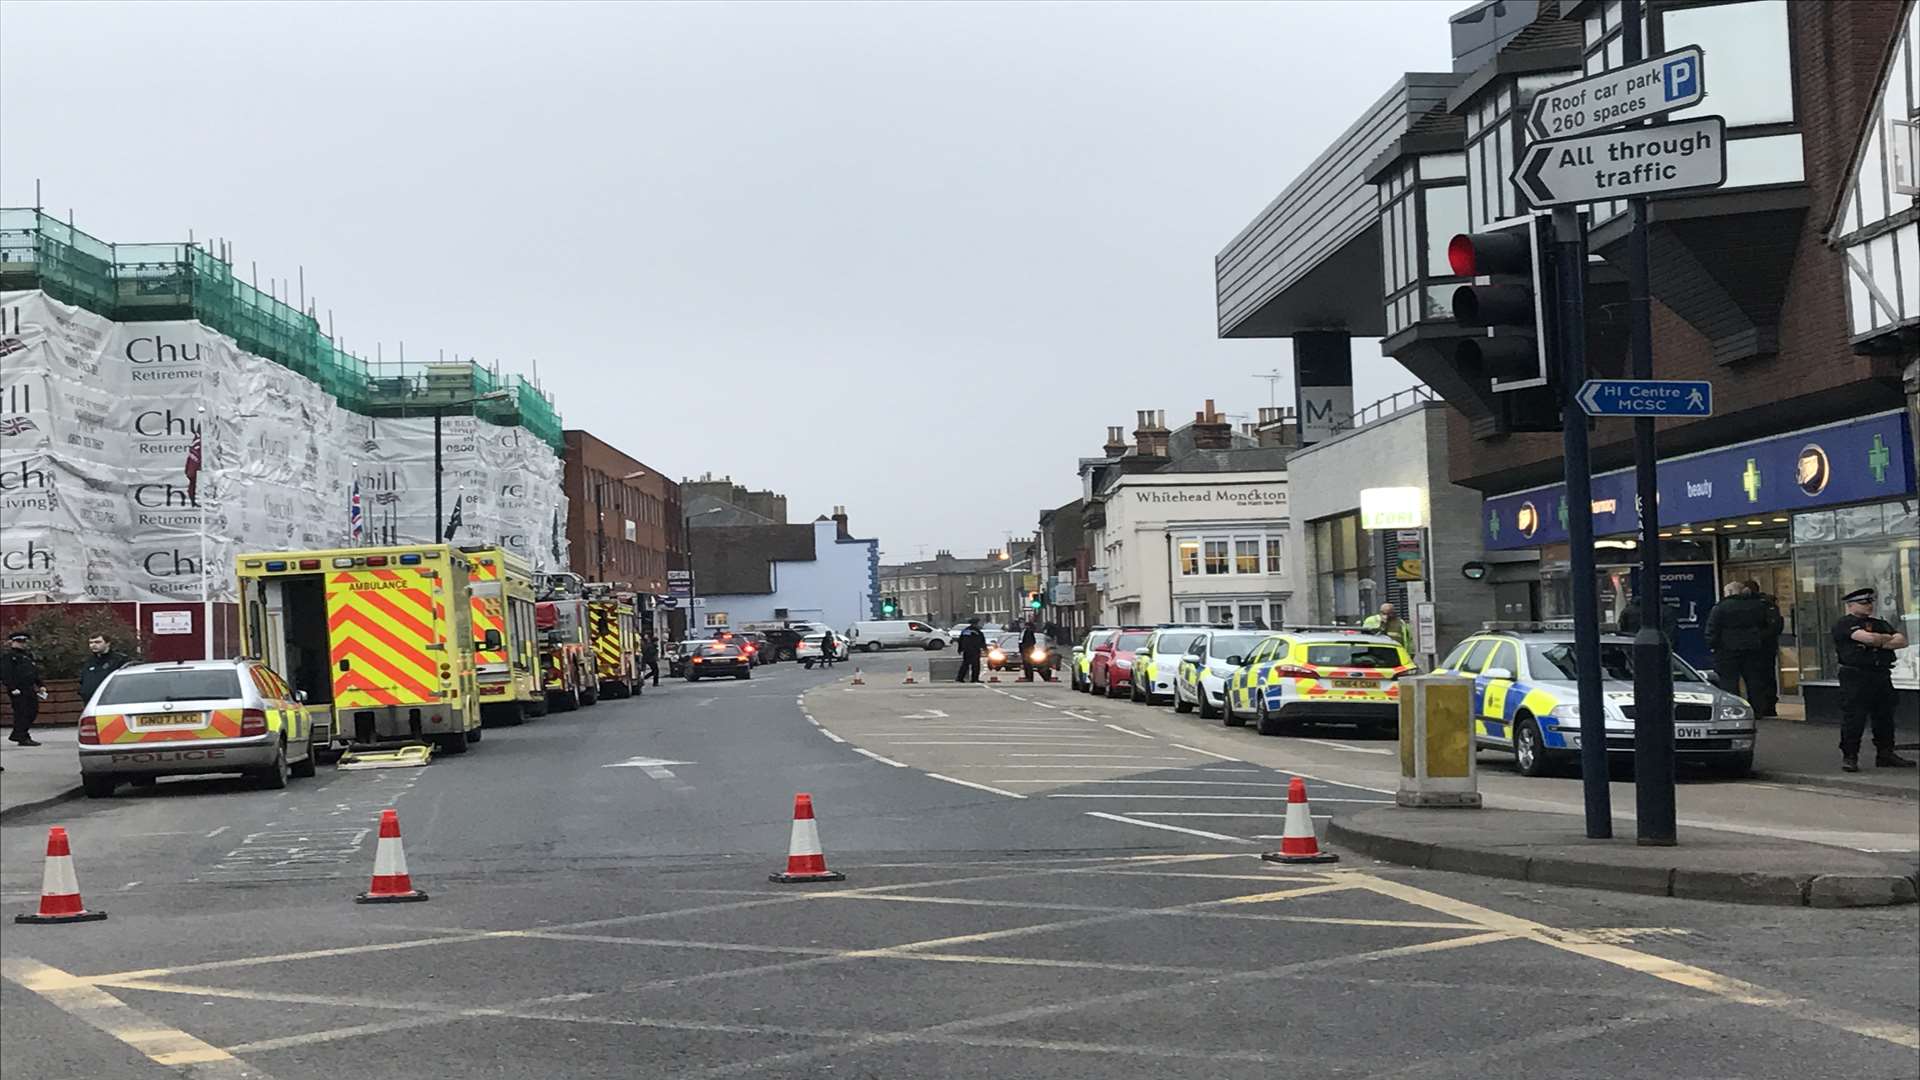 King Street has been closed between the Sittingbourne Road traffic lights and Church Street